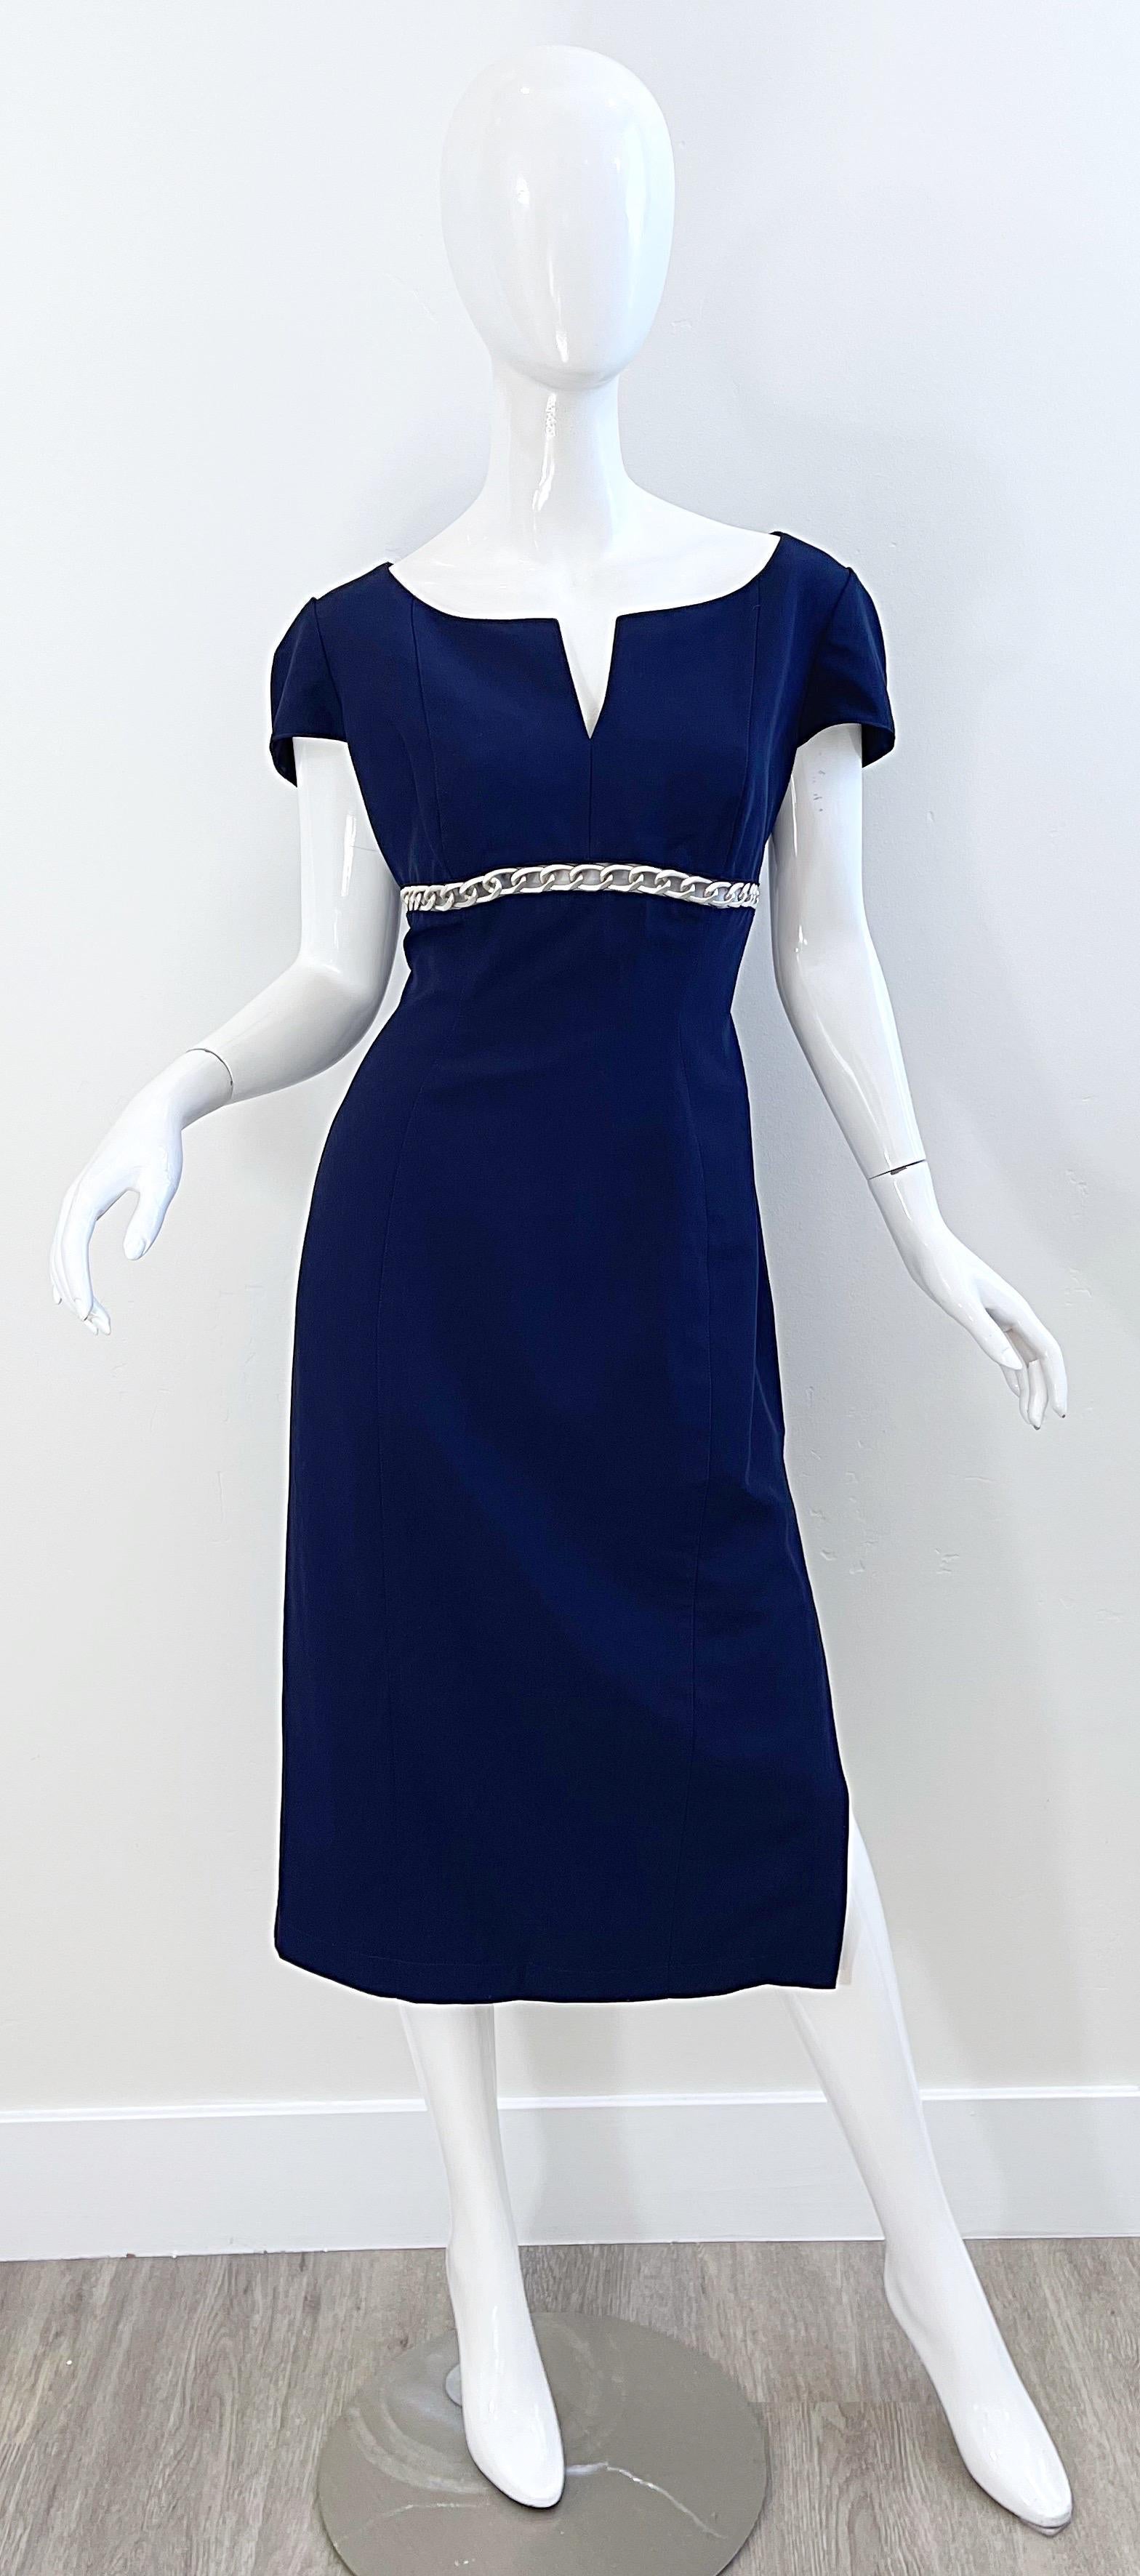 Chic and sexy early 90s THIERRY MUGLER navy blue pin-up style dress ! Features silver chain cut-out detail under the bust. Hidden zipper up the back with hook-and-eye closure. Slit on the left hem reveals just the right amount of leg. Fully